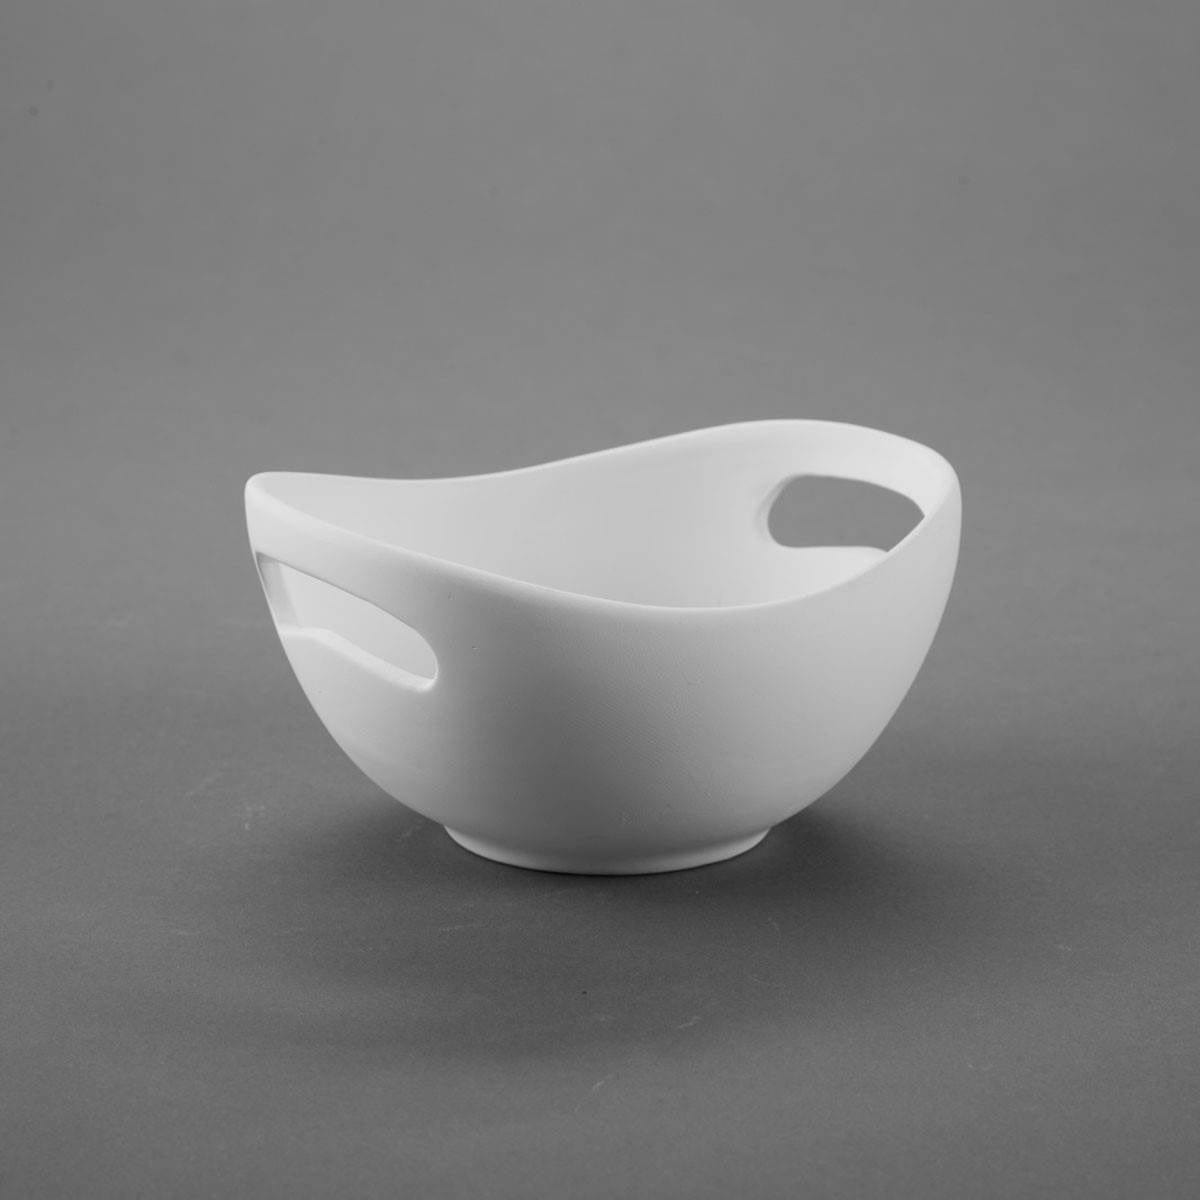 Duncan 35370 Bisque Small Handled Bowl